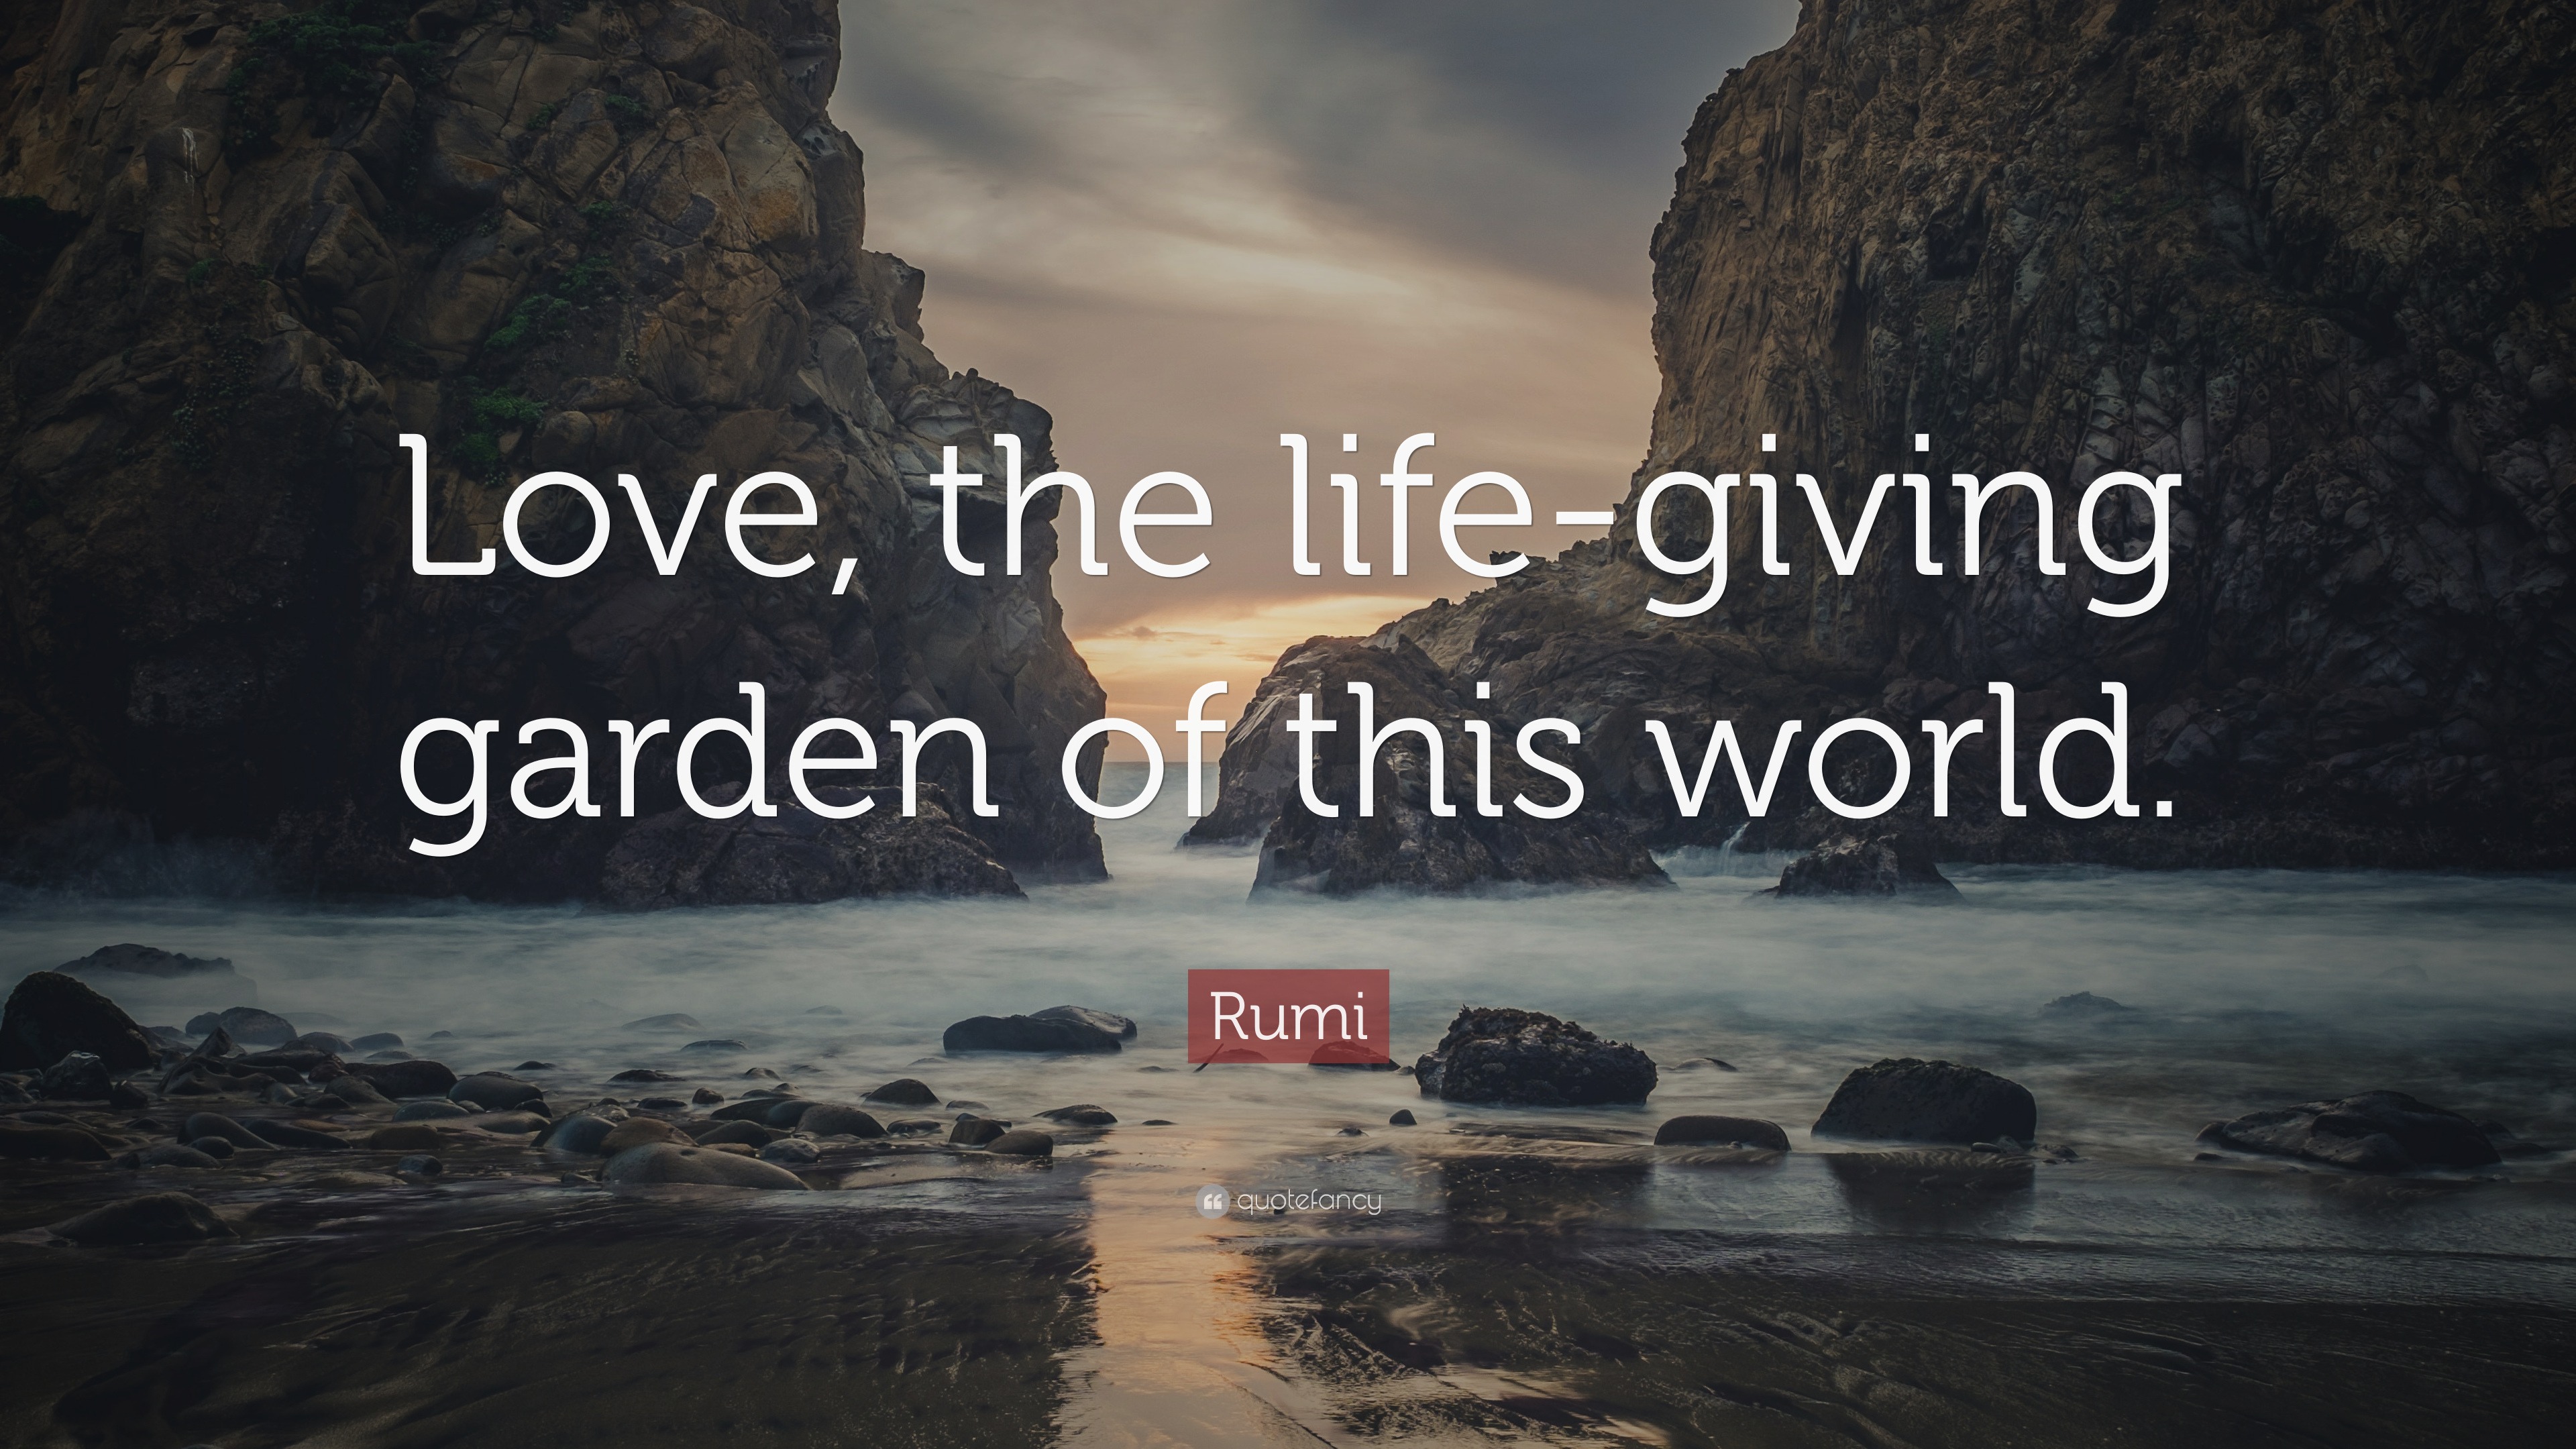 Rumi Quote “Love the life giving garden of this world ”